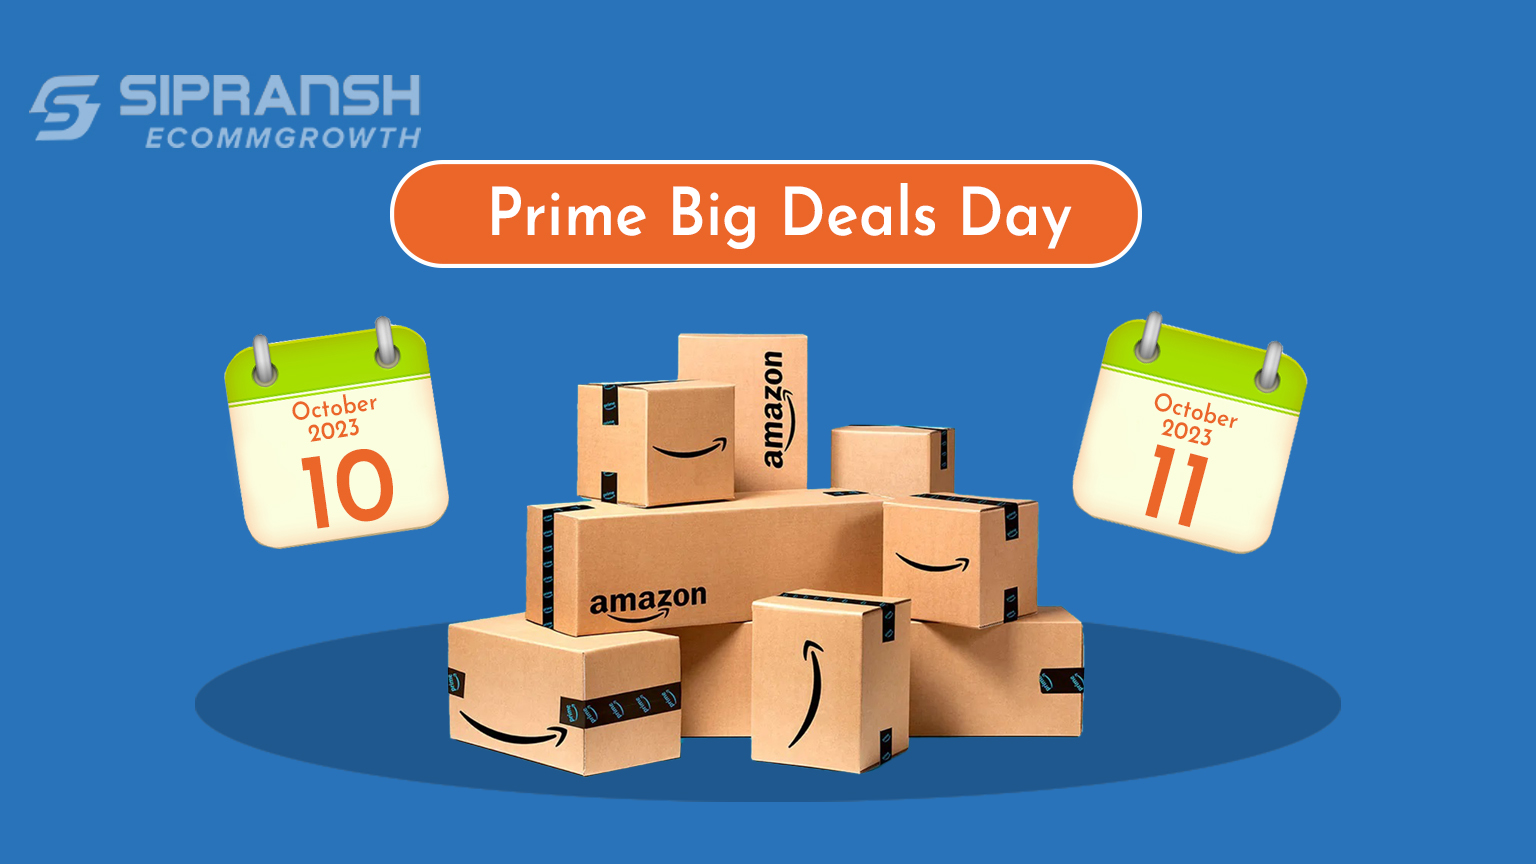 Prime Bid Deal Days 2023 are October 10 & 11: Everything you need to know